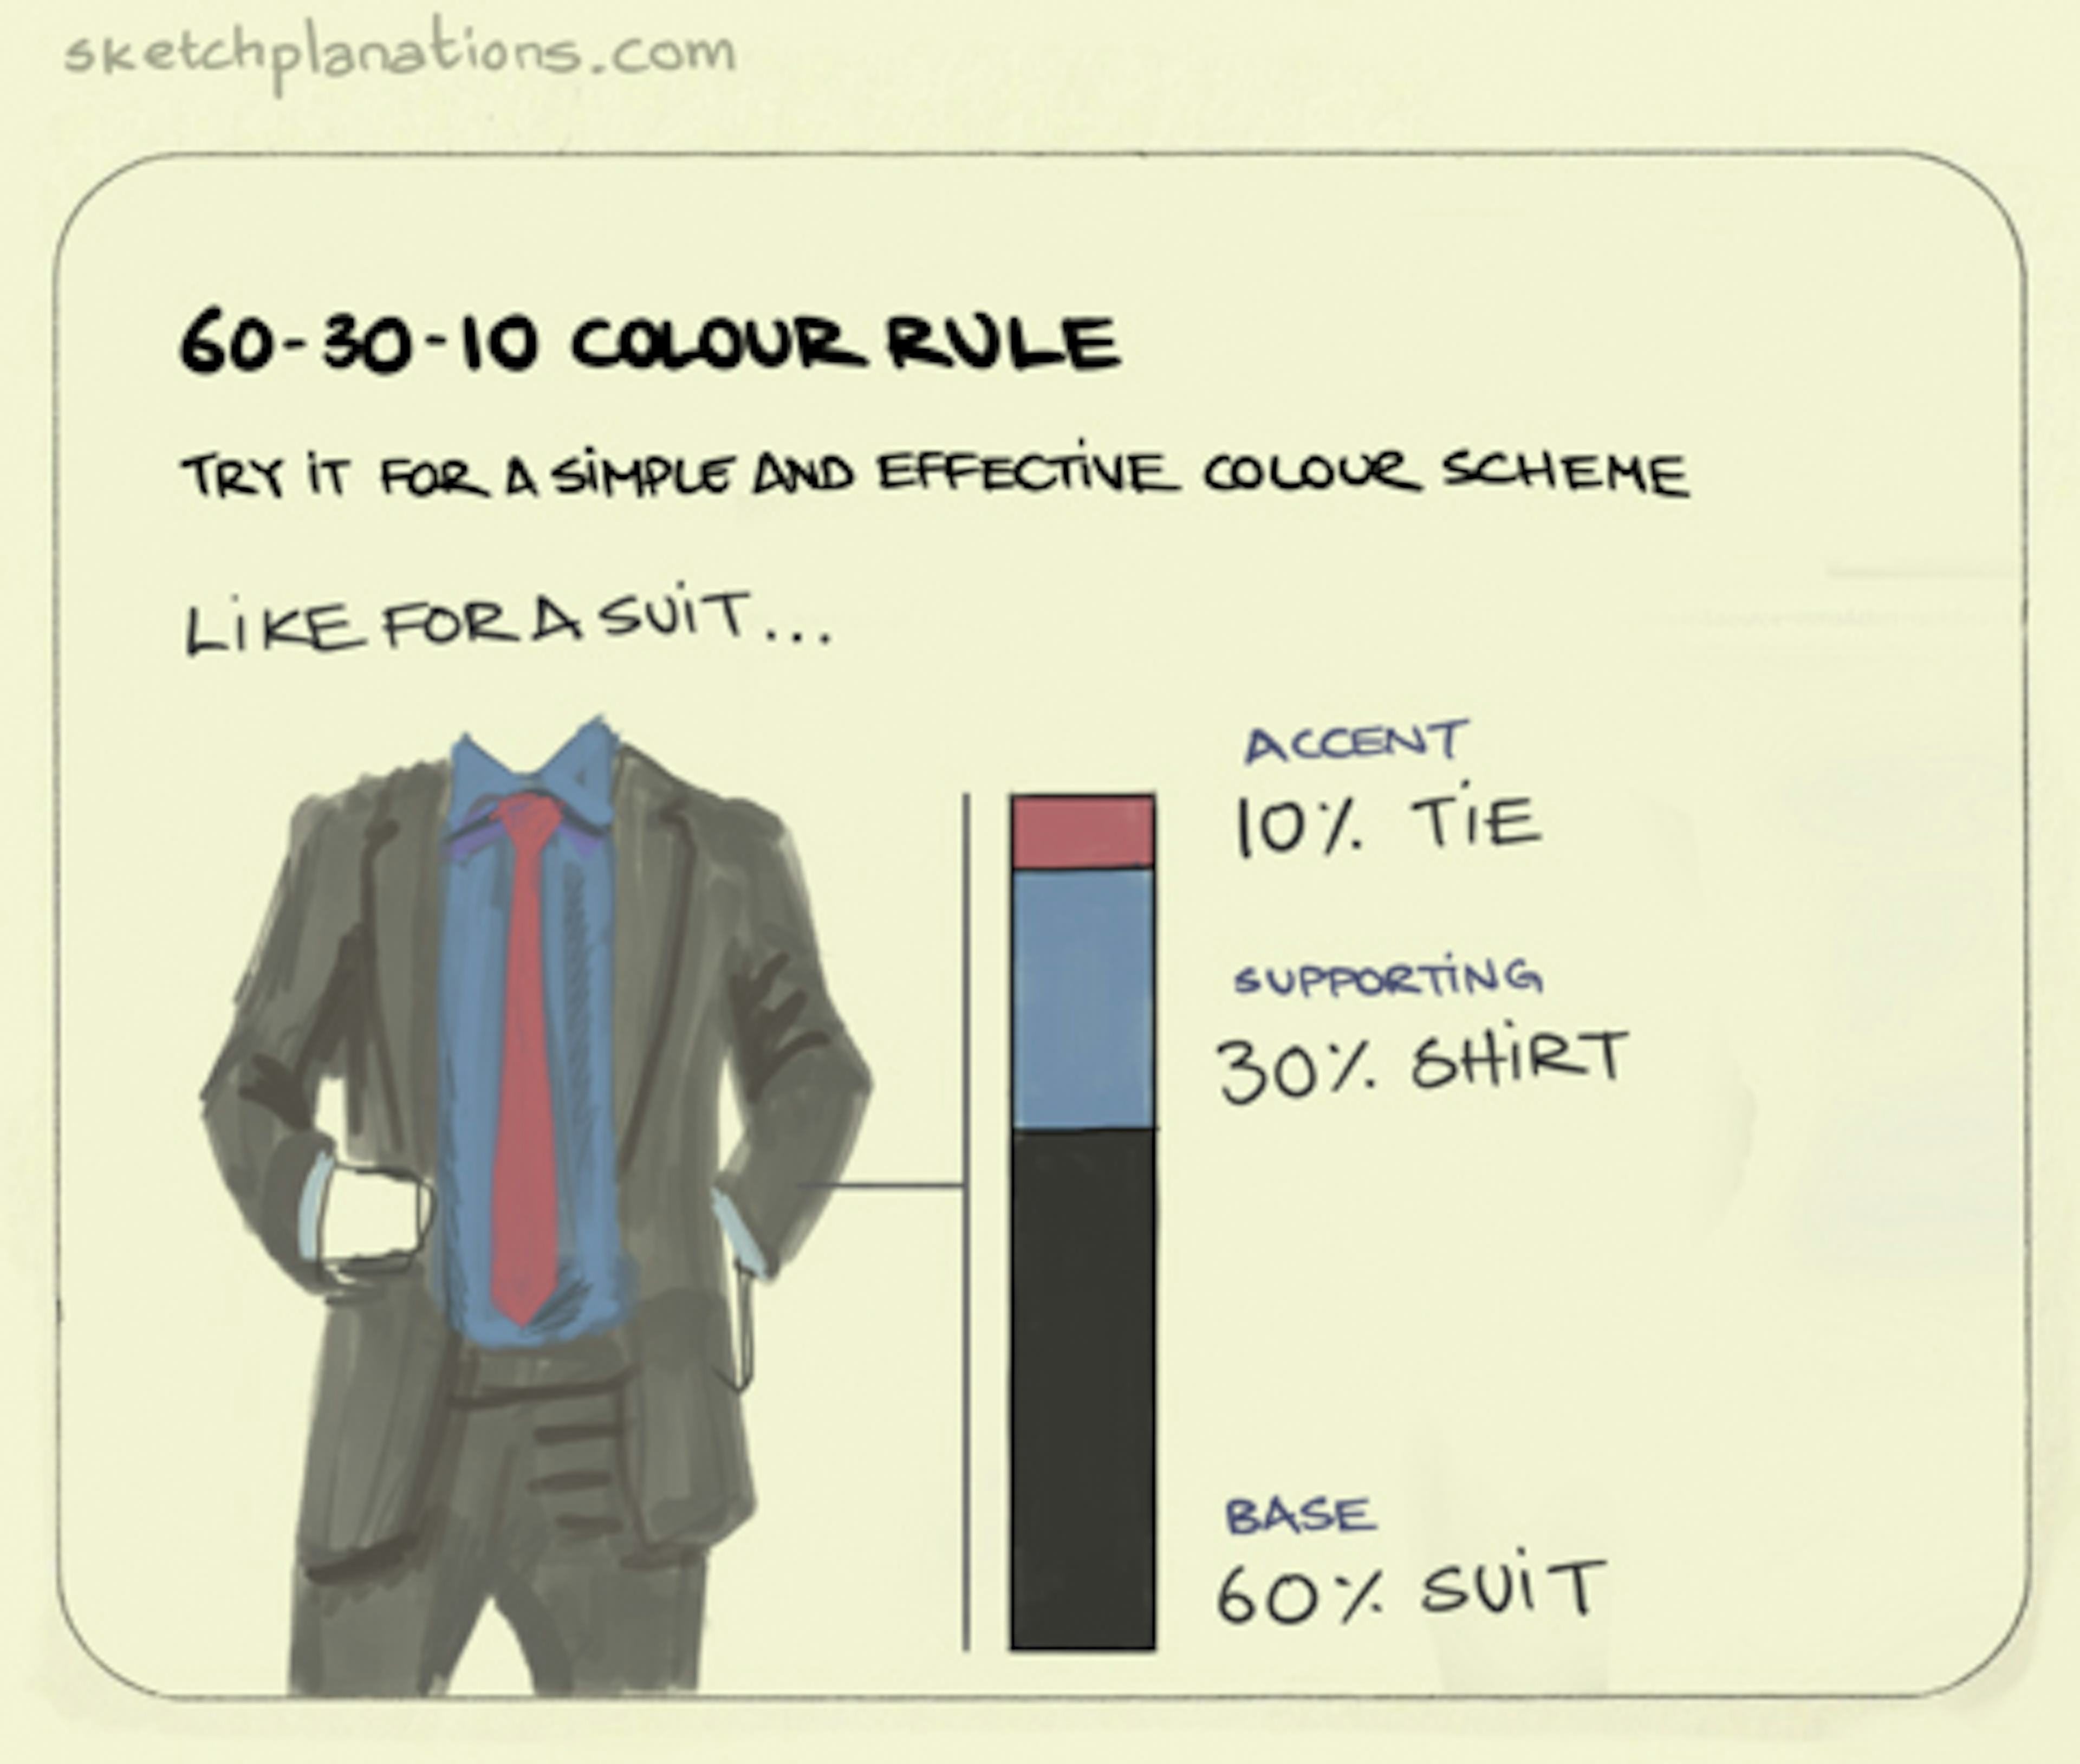 60-30-10 colour rule illustration: a man is shown wearing a plain suit, button up shirt and tie. 60% of colour on show is from the suit; 30% is from the shirt; 10% is from the tie. 